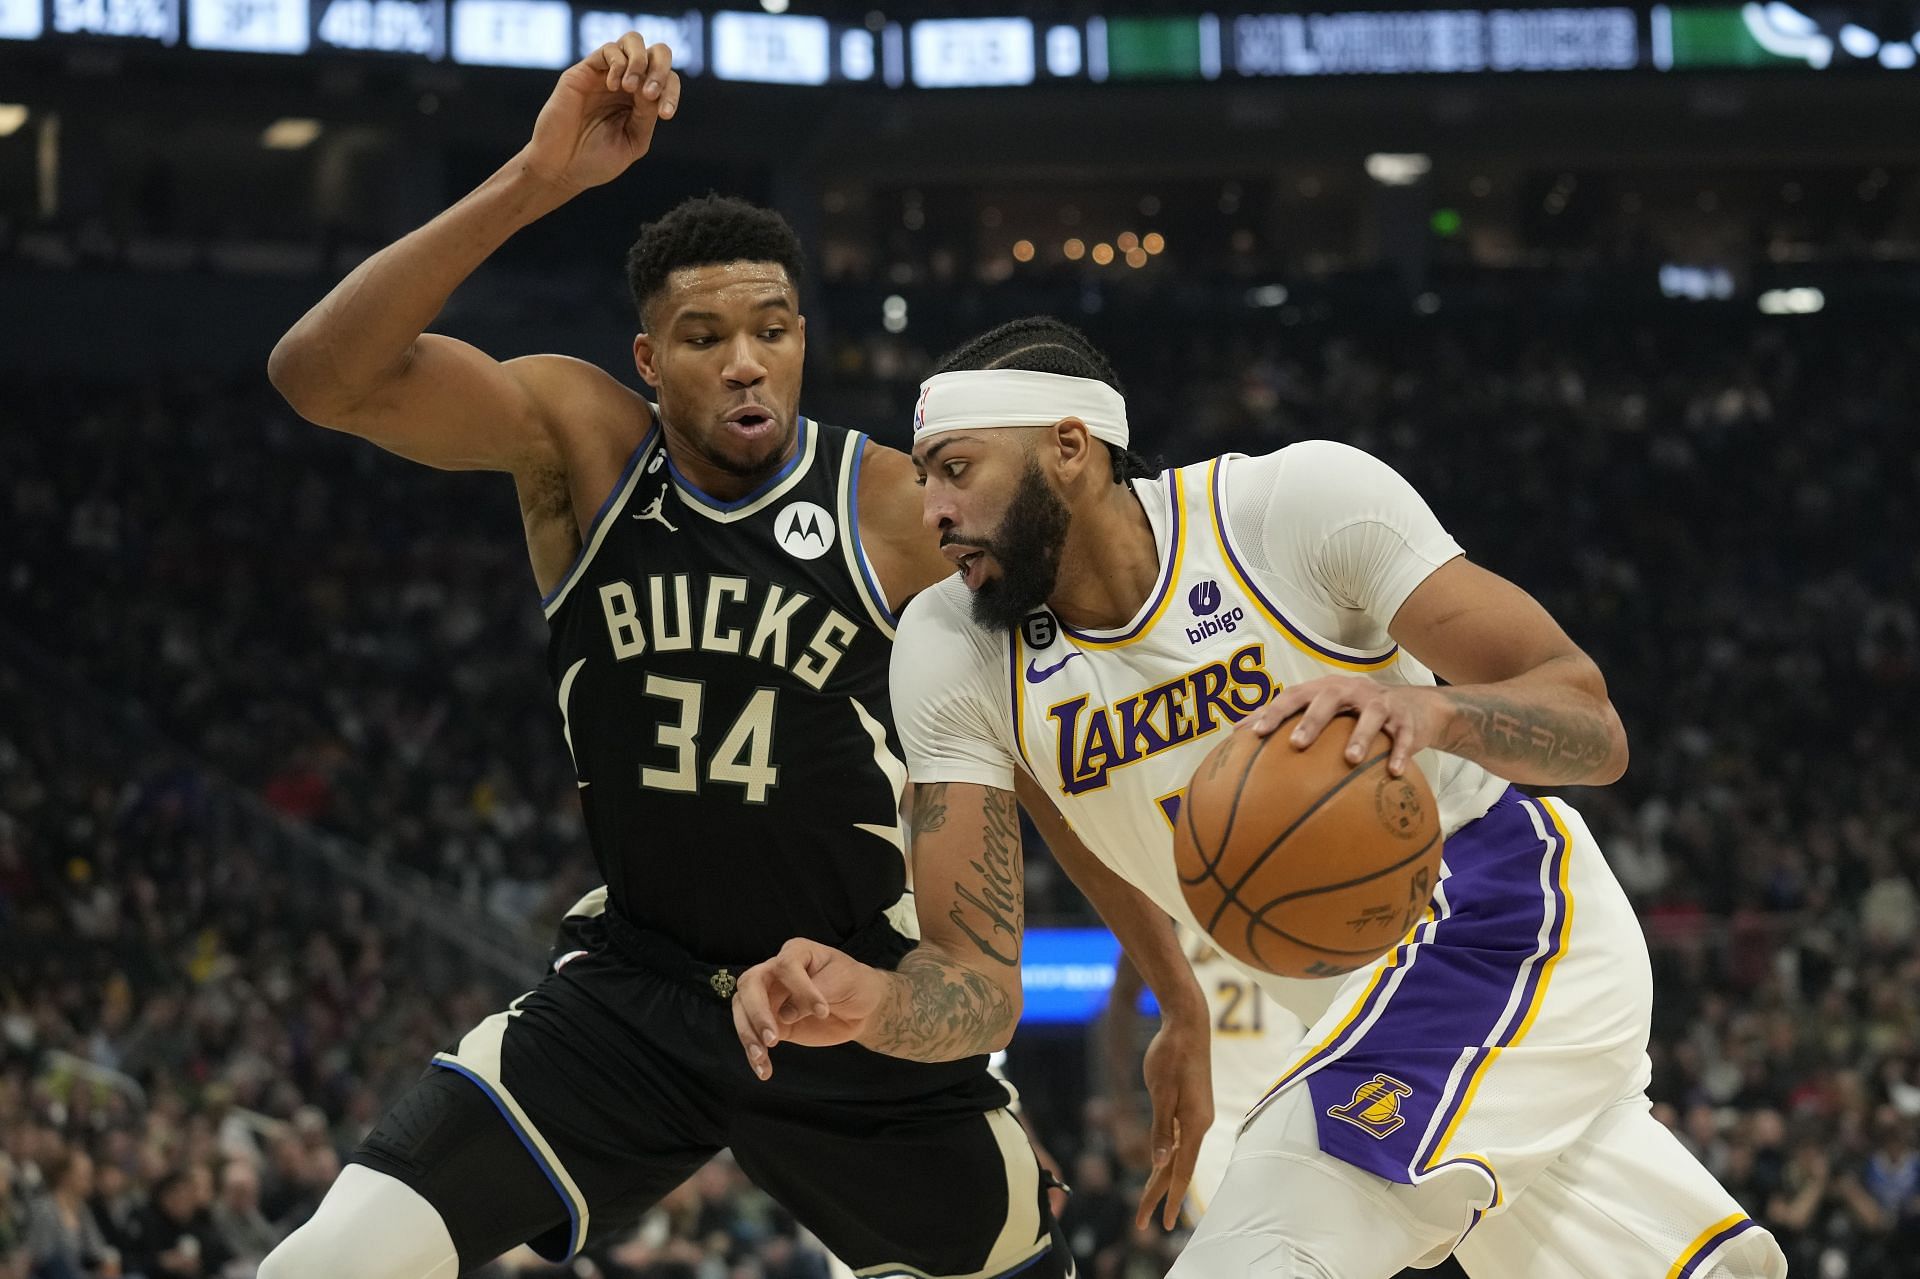 The Milwaukee Bucks threw everything at Anthony Davis and the Lakers superstar still dominated.